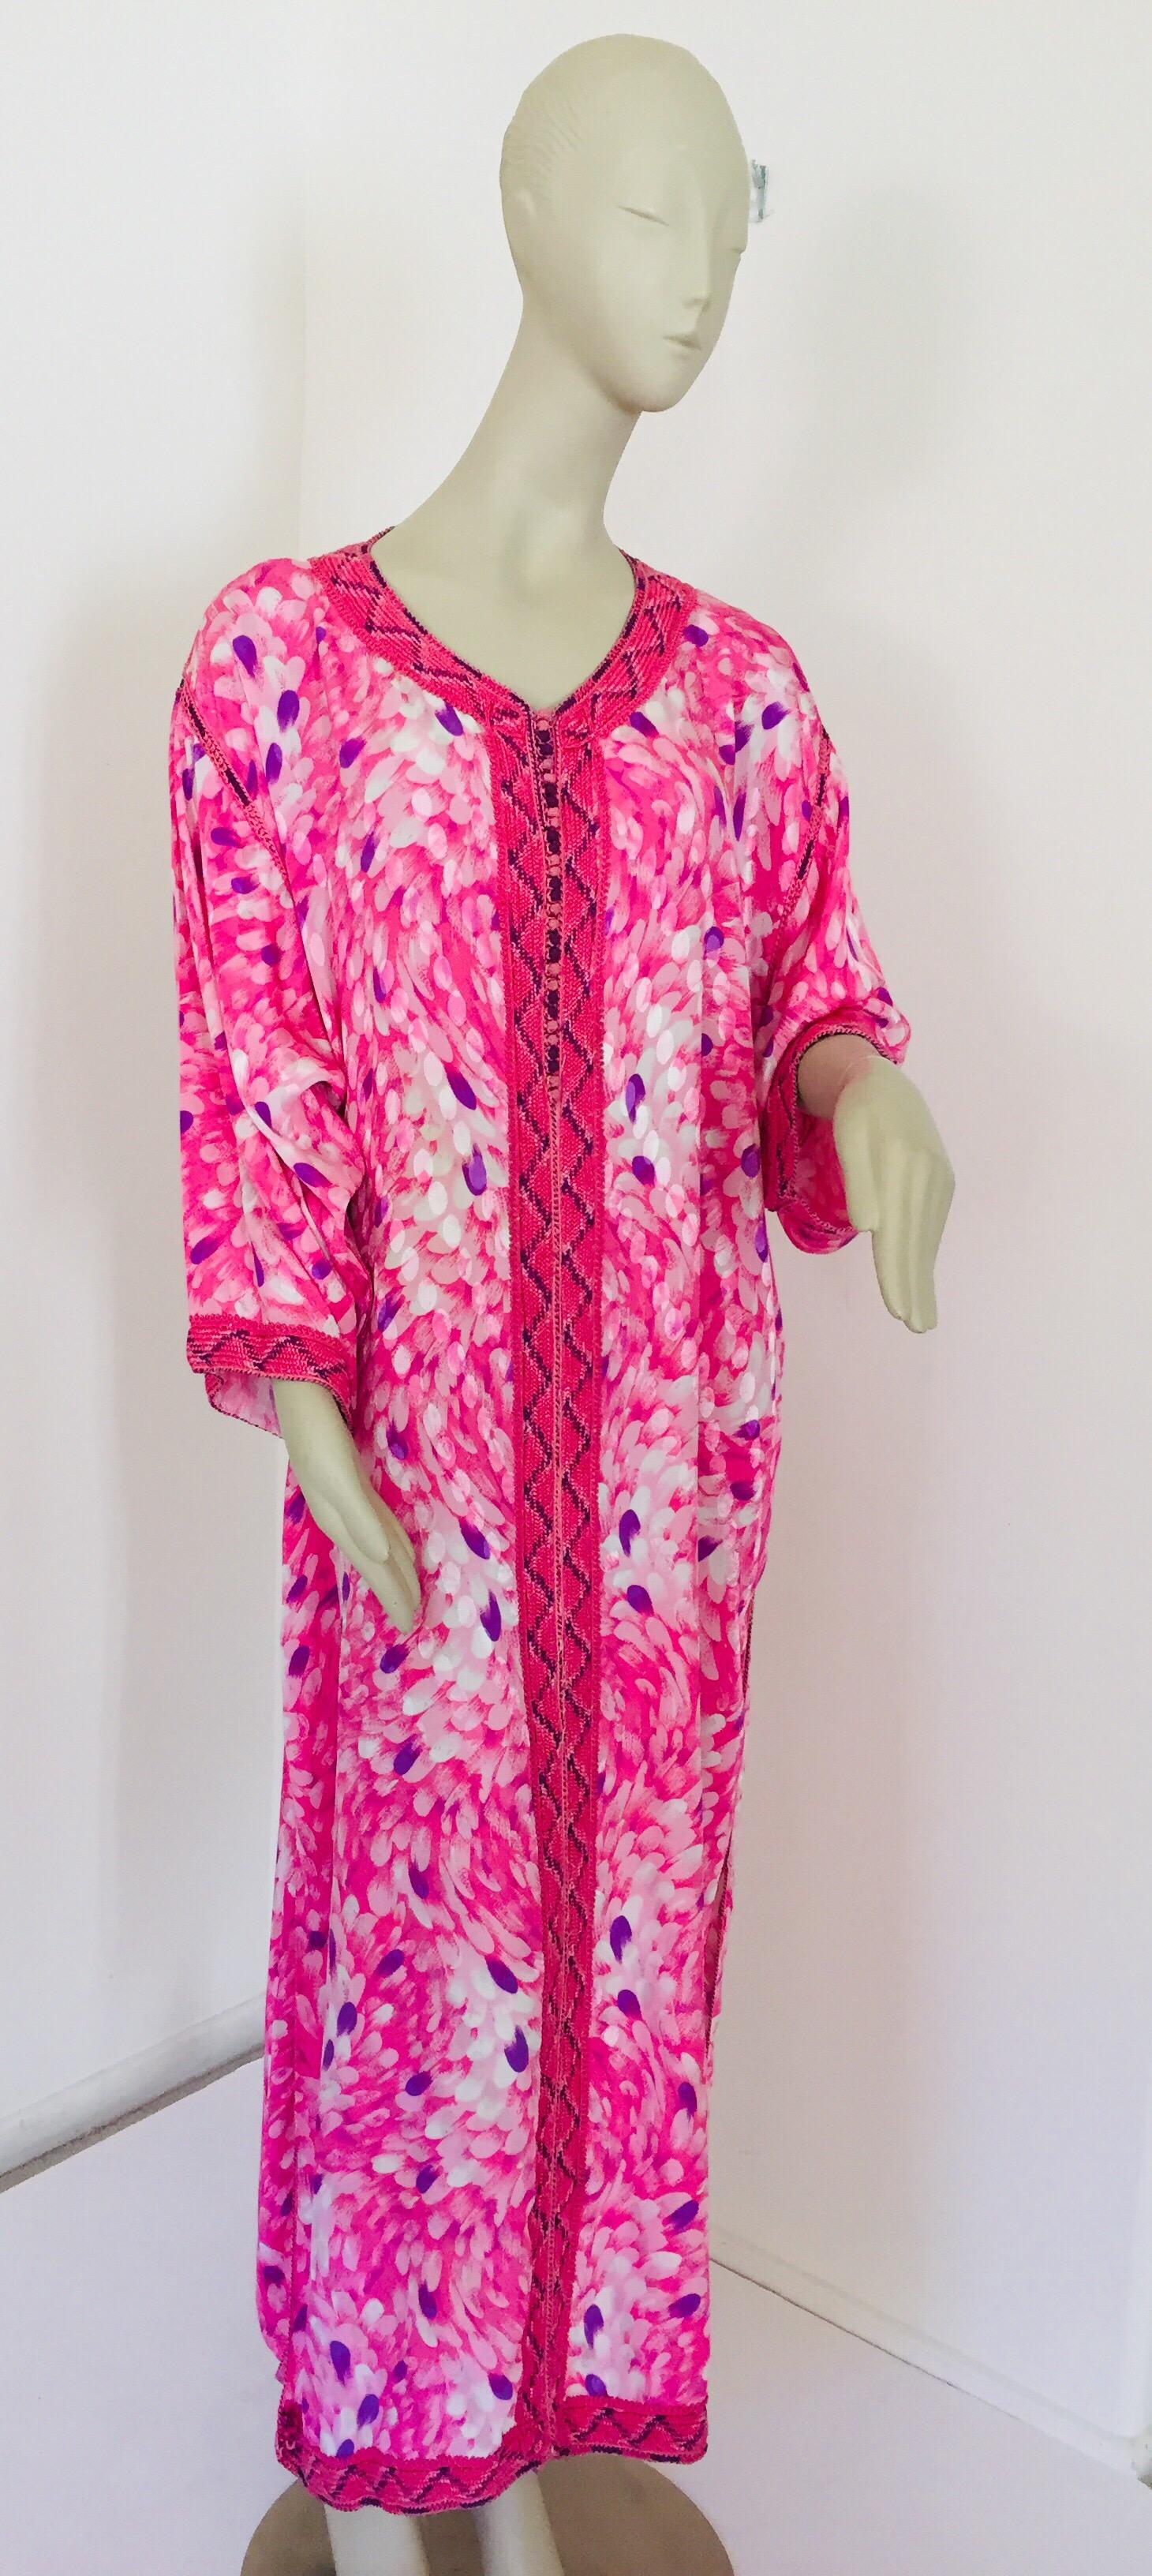 Moroccan Floral Pink Kaftan Maxi Dress Caftan Size Large In Good Condition For Sale In North Hollywood, CA